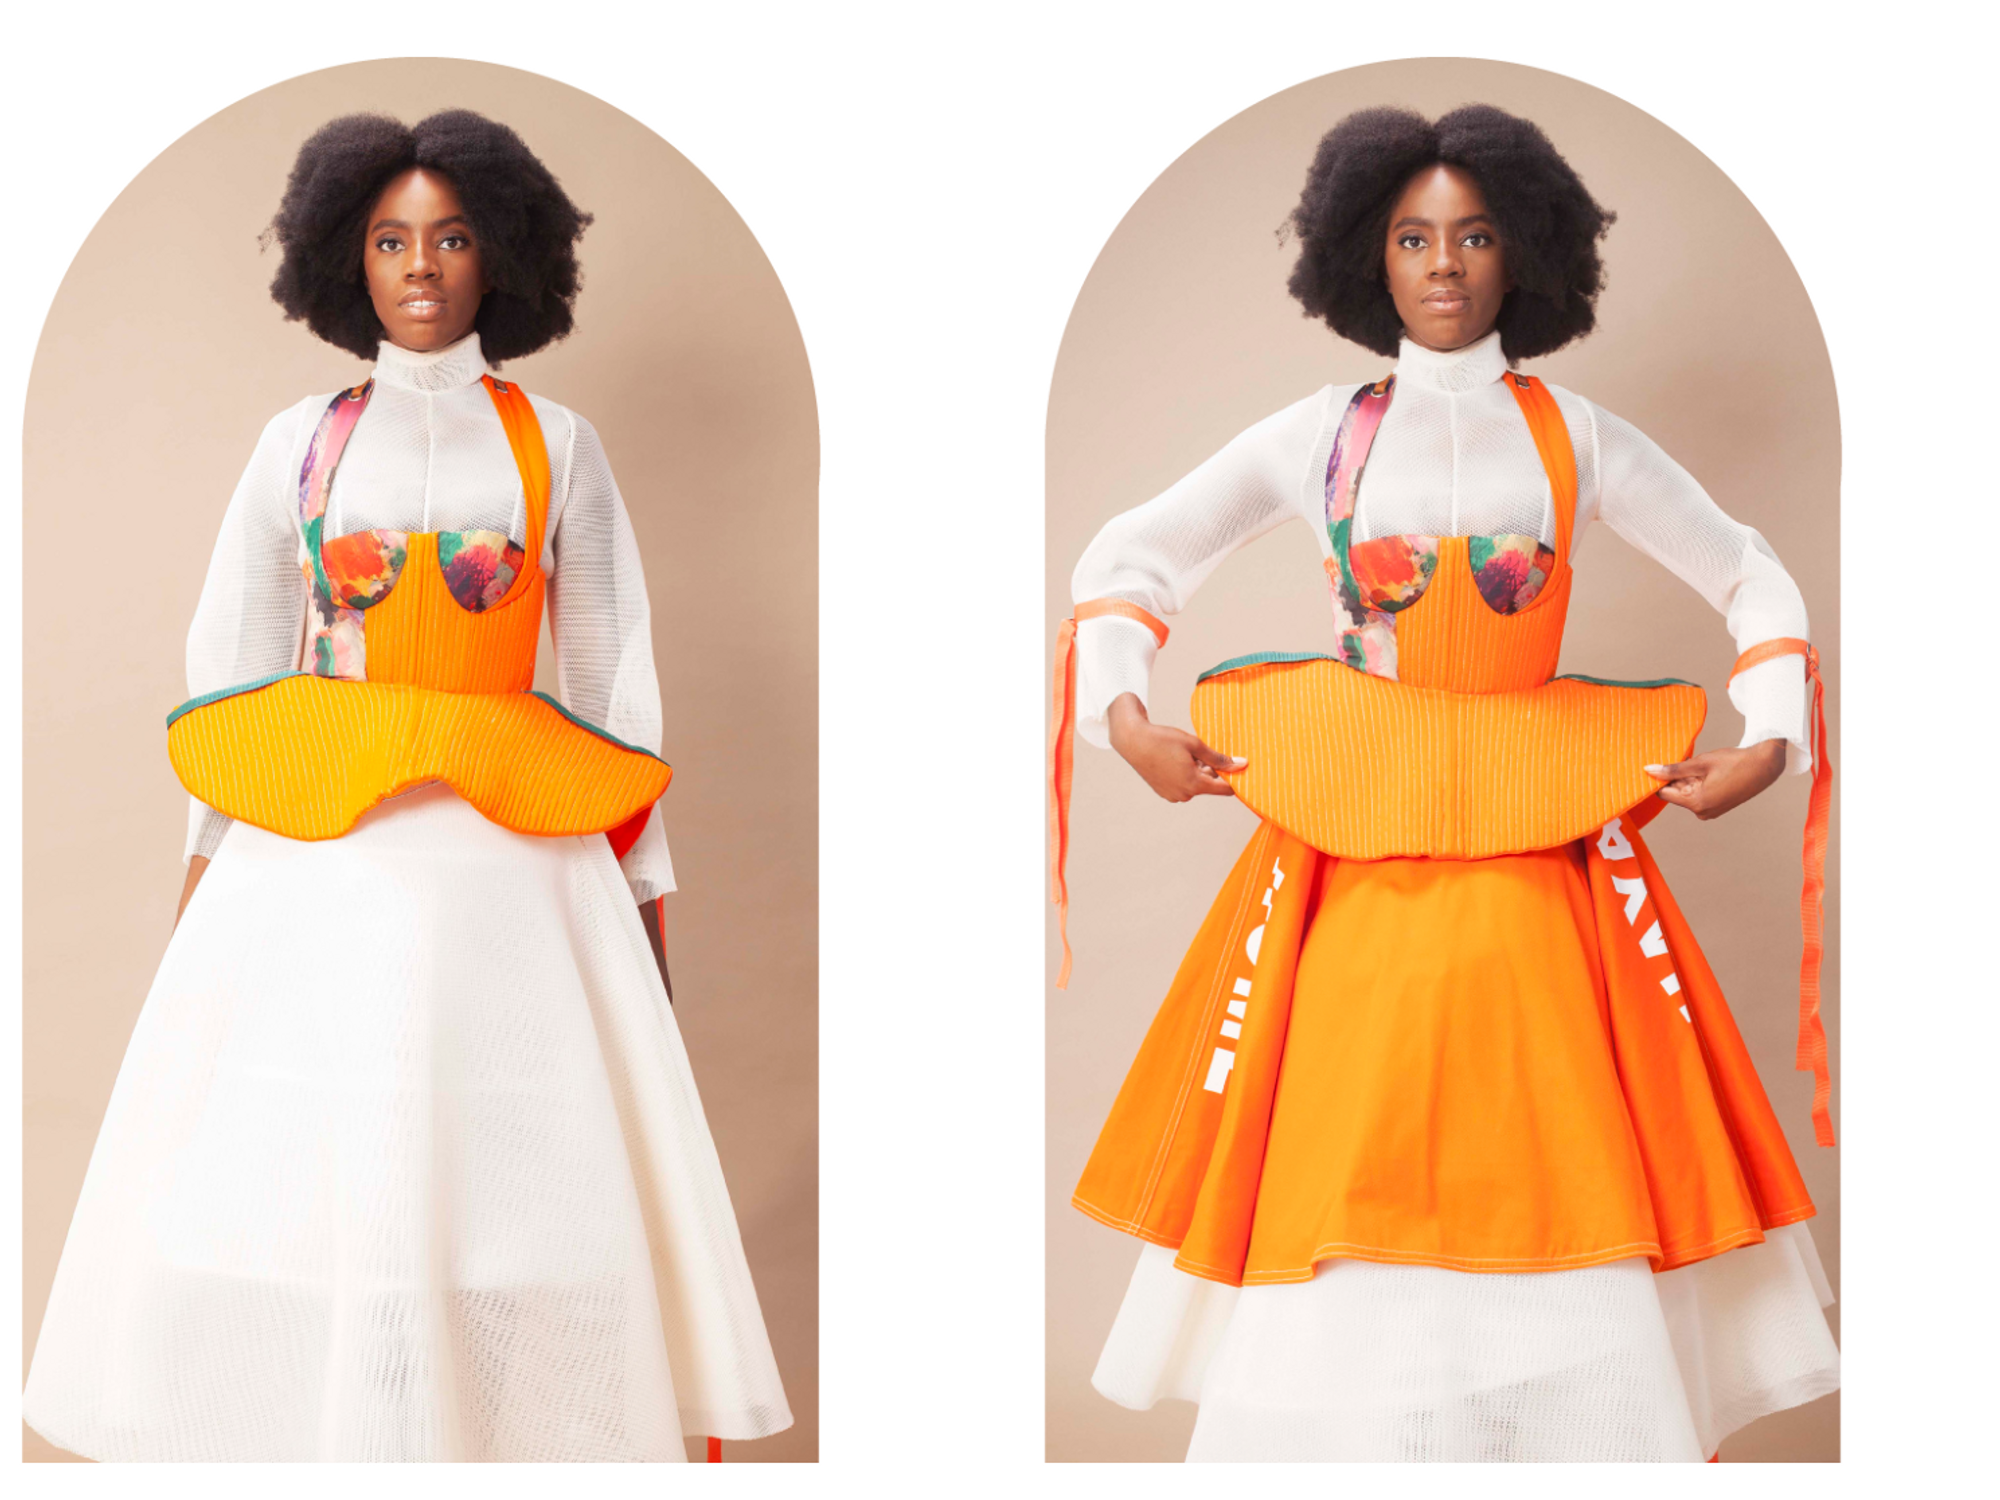 An image of an outfit from the fashion label Munkus, of a woman in a white dress with an orange skirt.